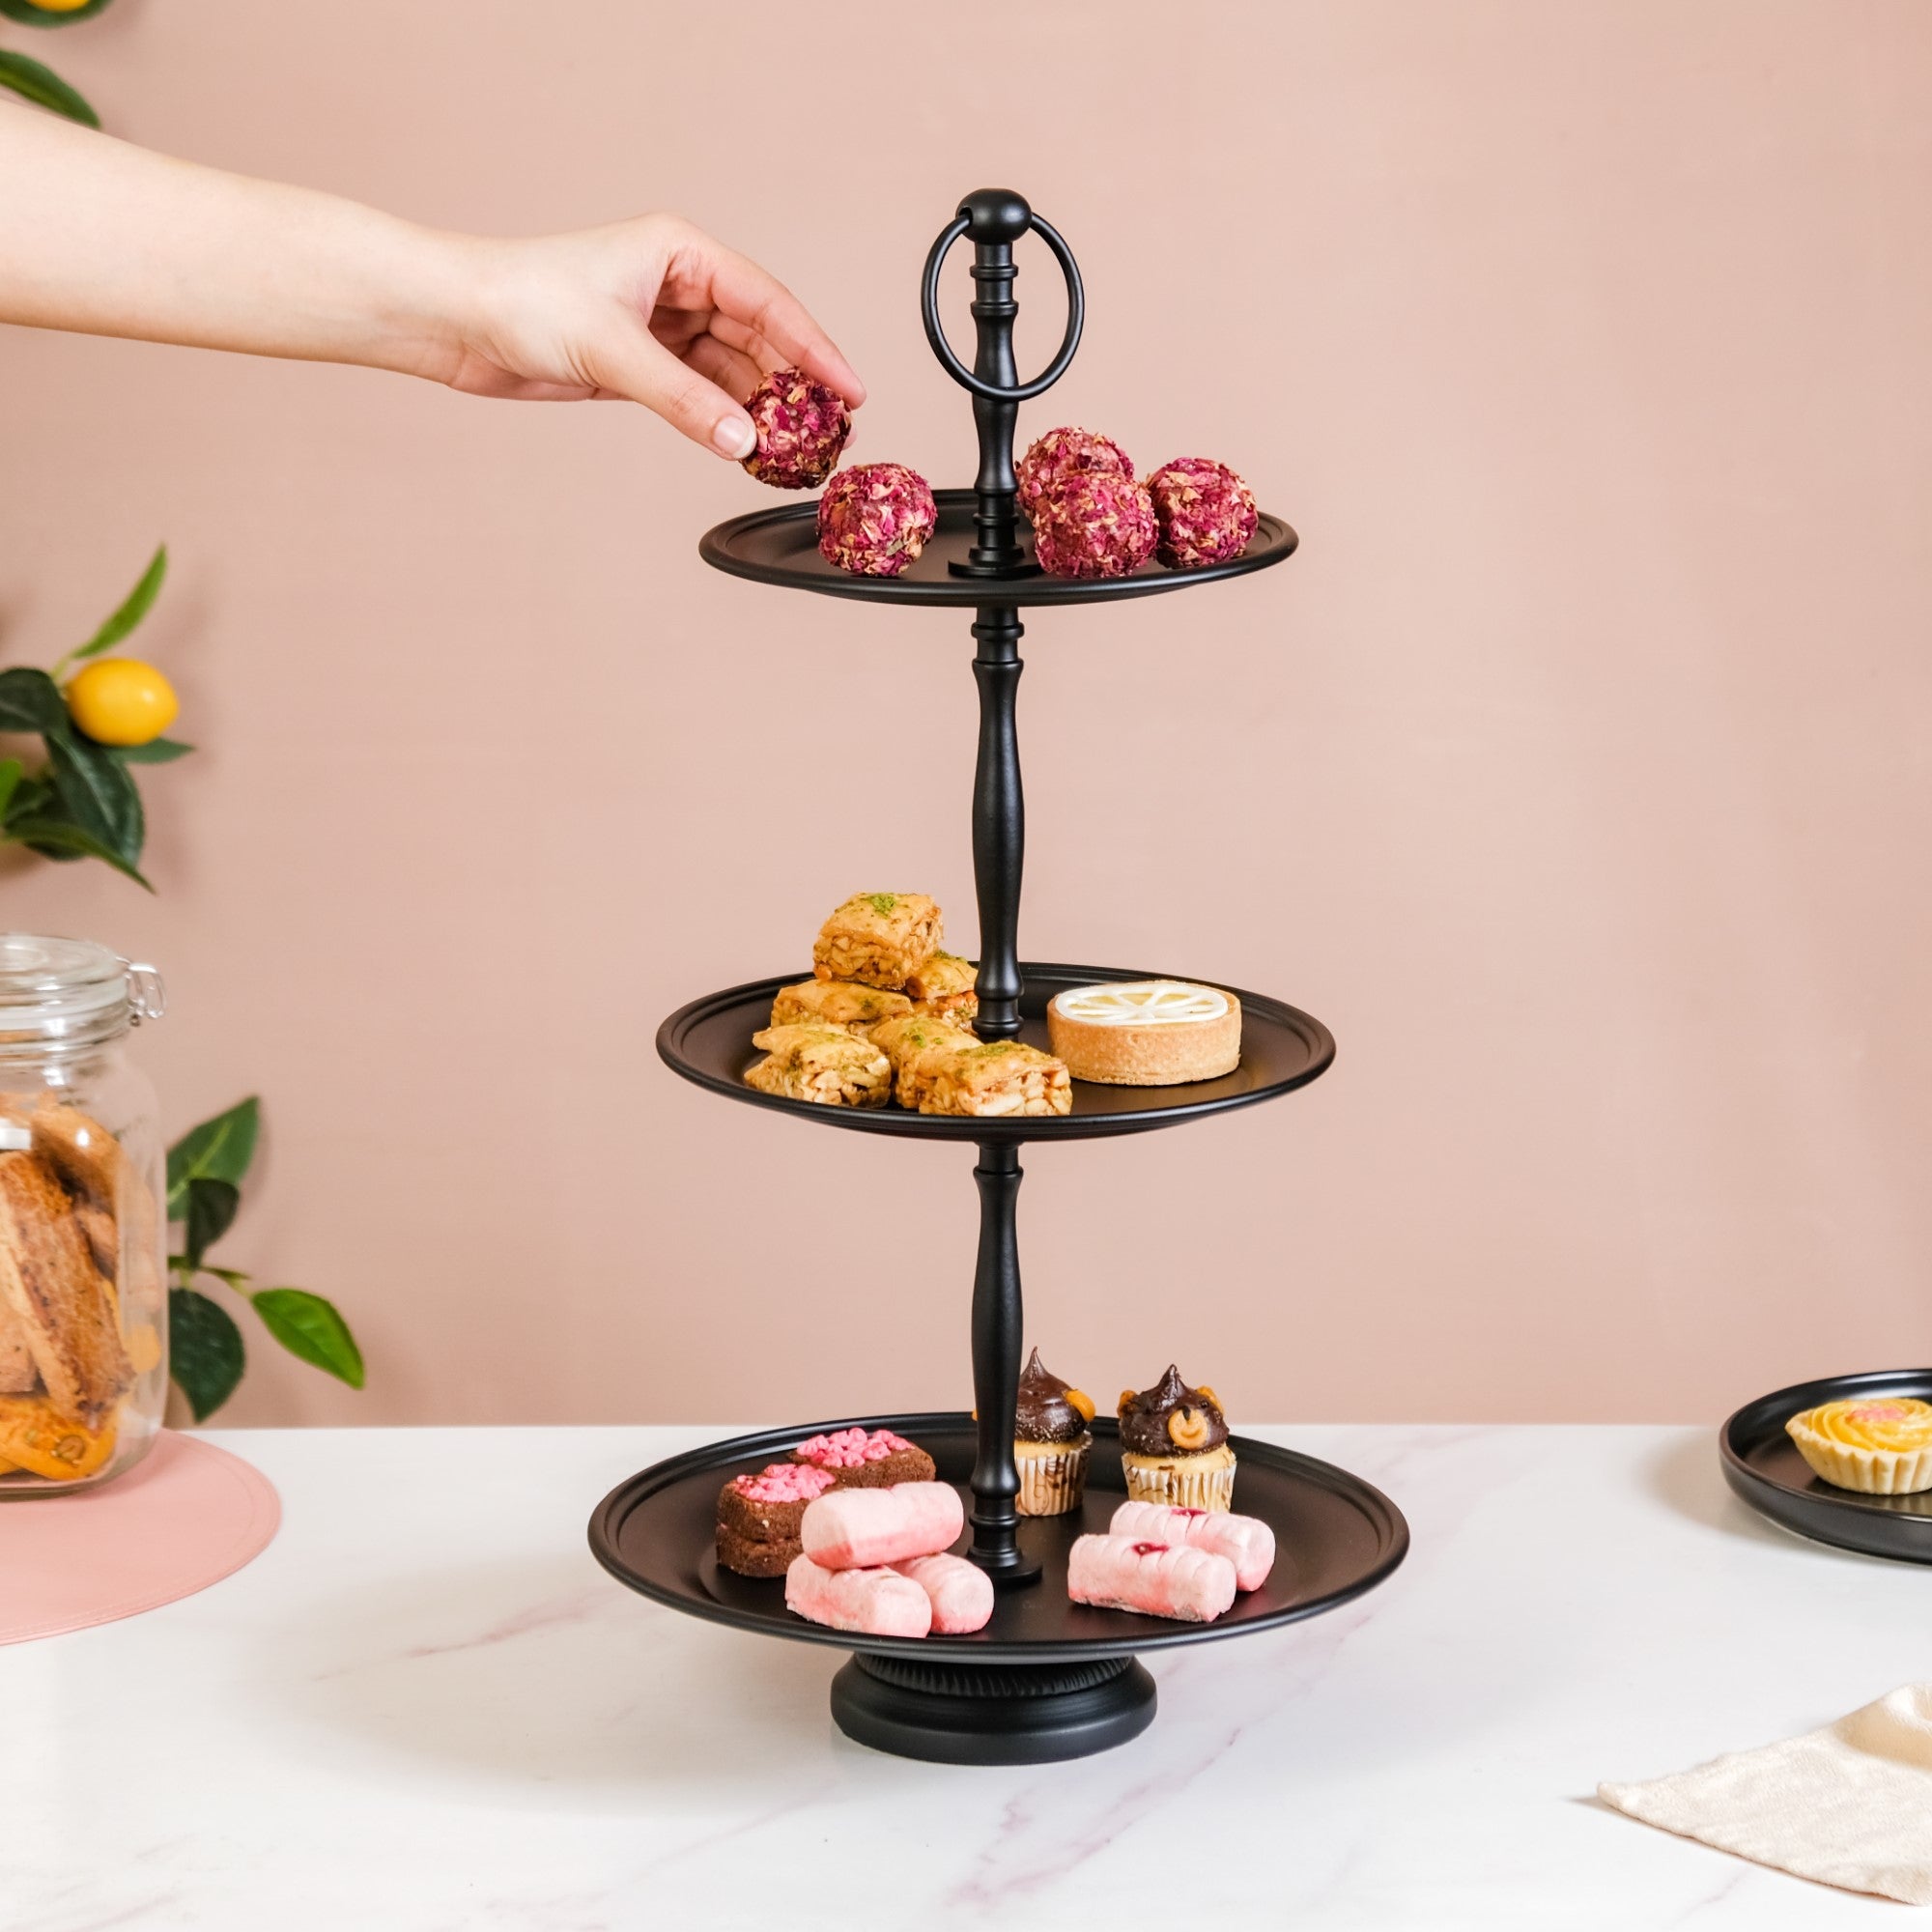 Cake Stands- Buy Metal Cake Stands Online at Best Prices